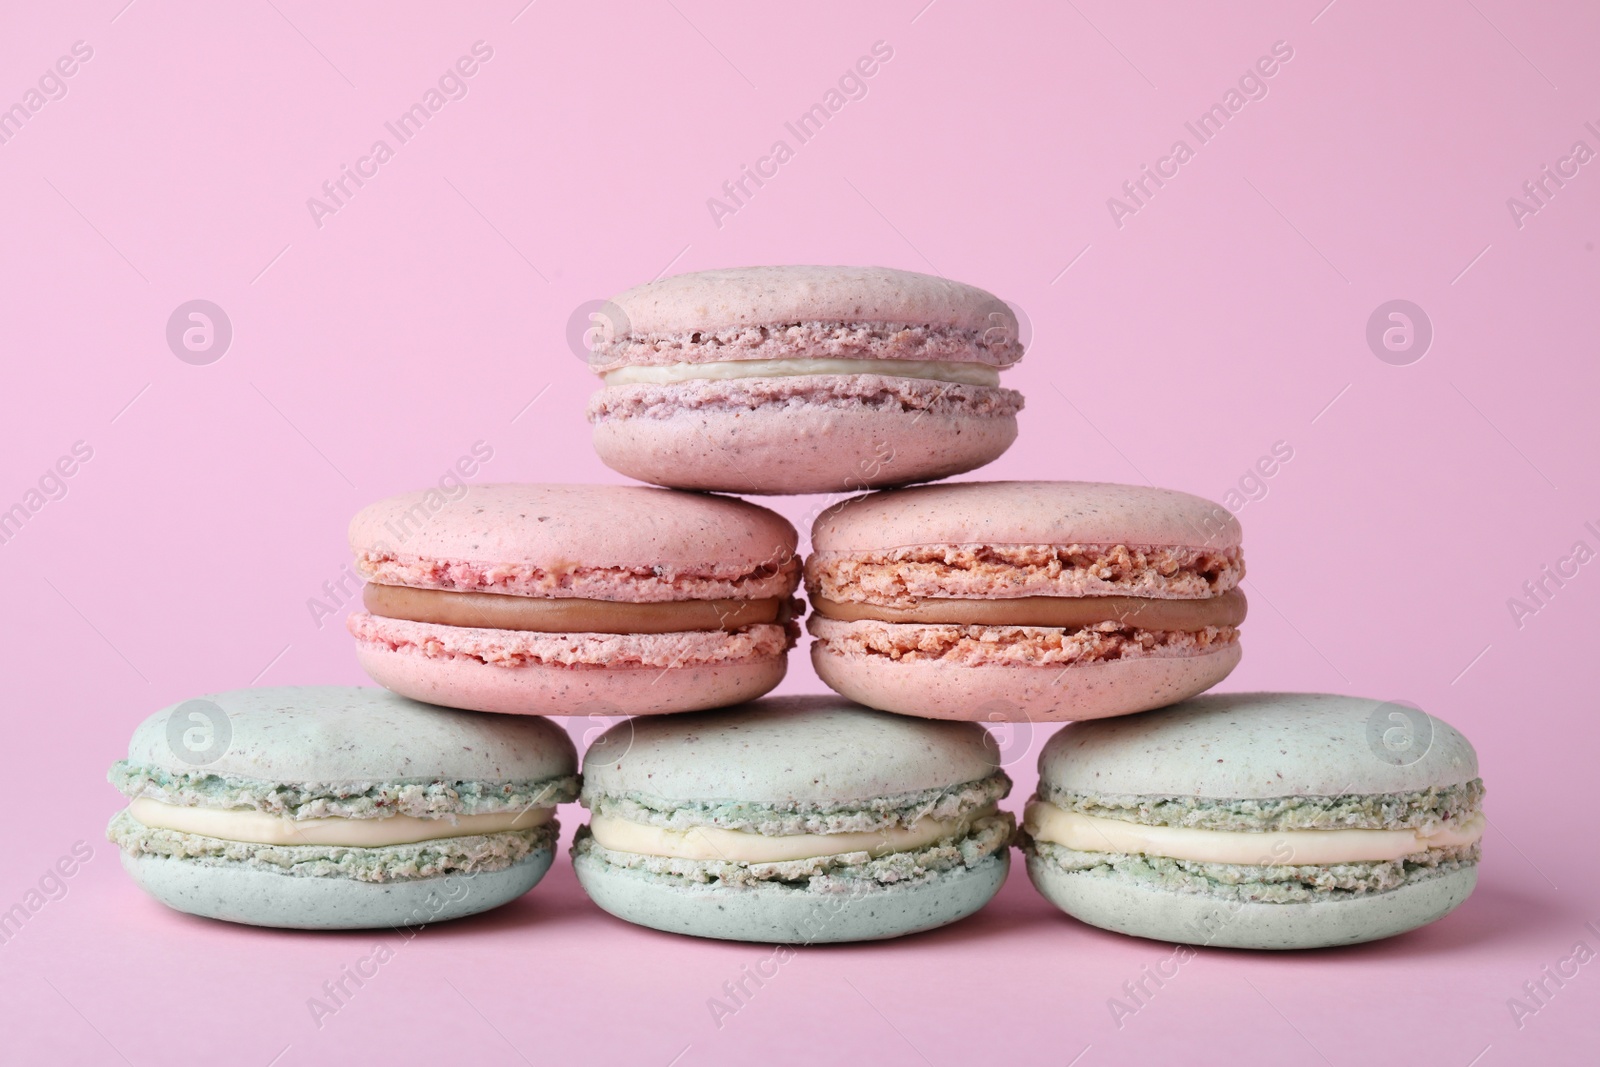 Photo of Pile of delicious colorful macarons on pink background